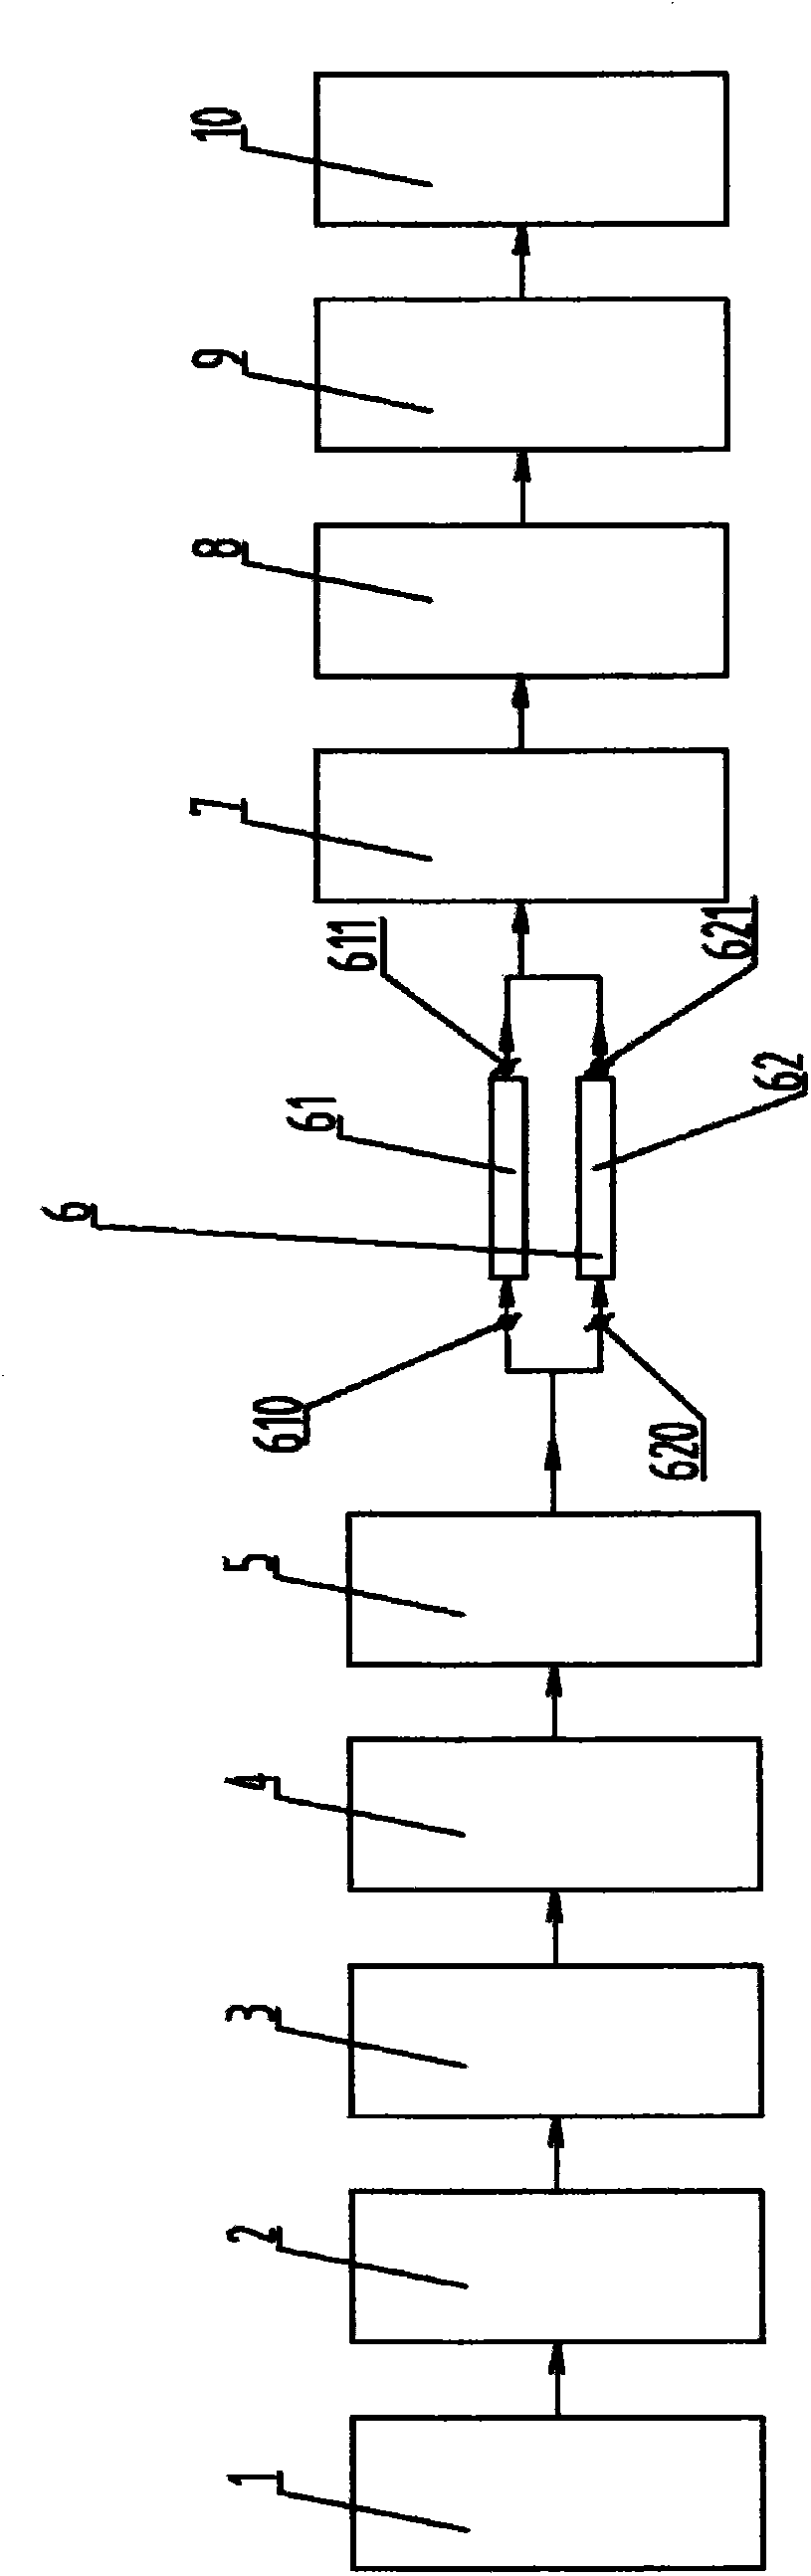 Supercritical carbon dioxide fluid dyeing device with two dye vats